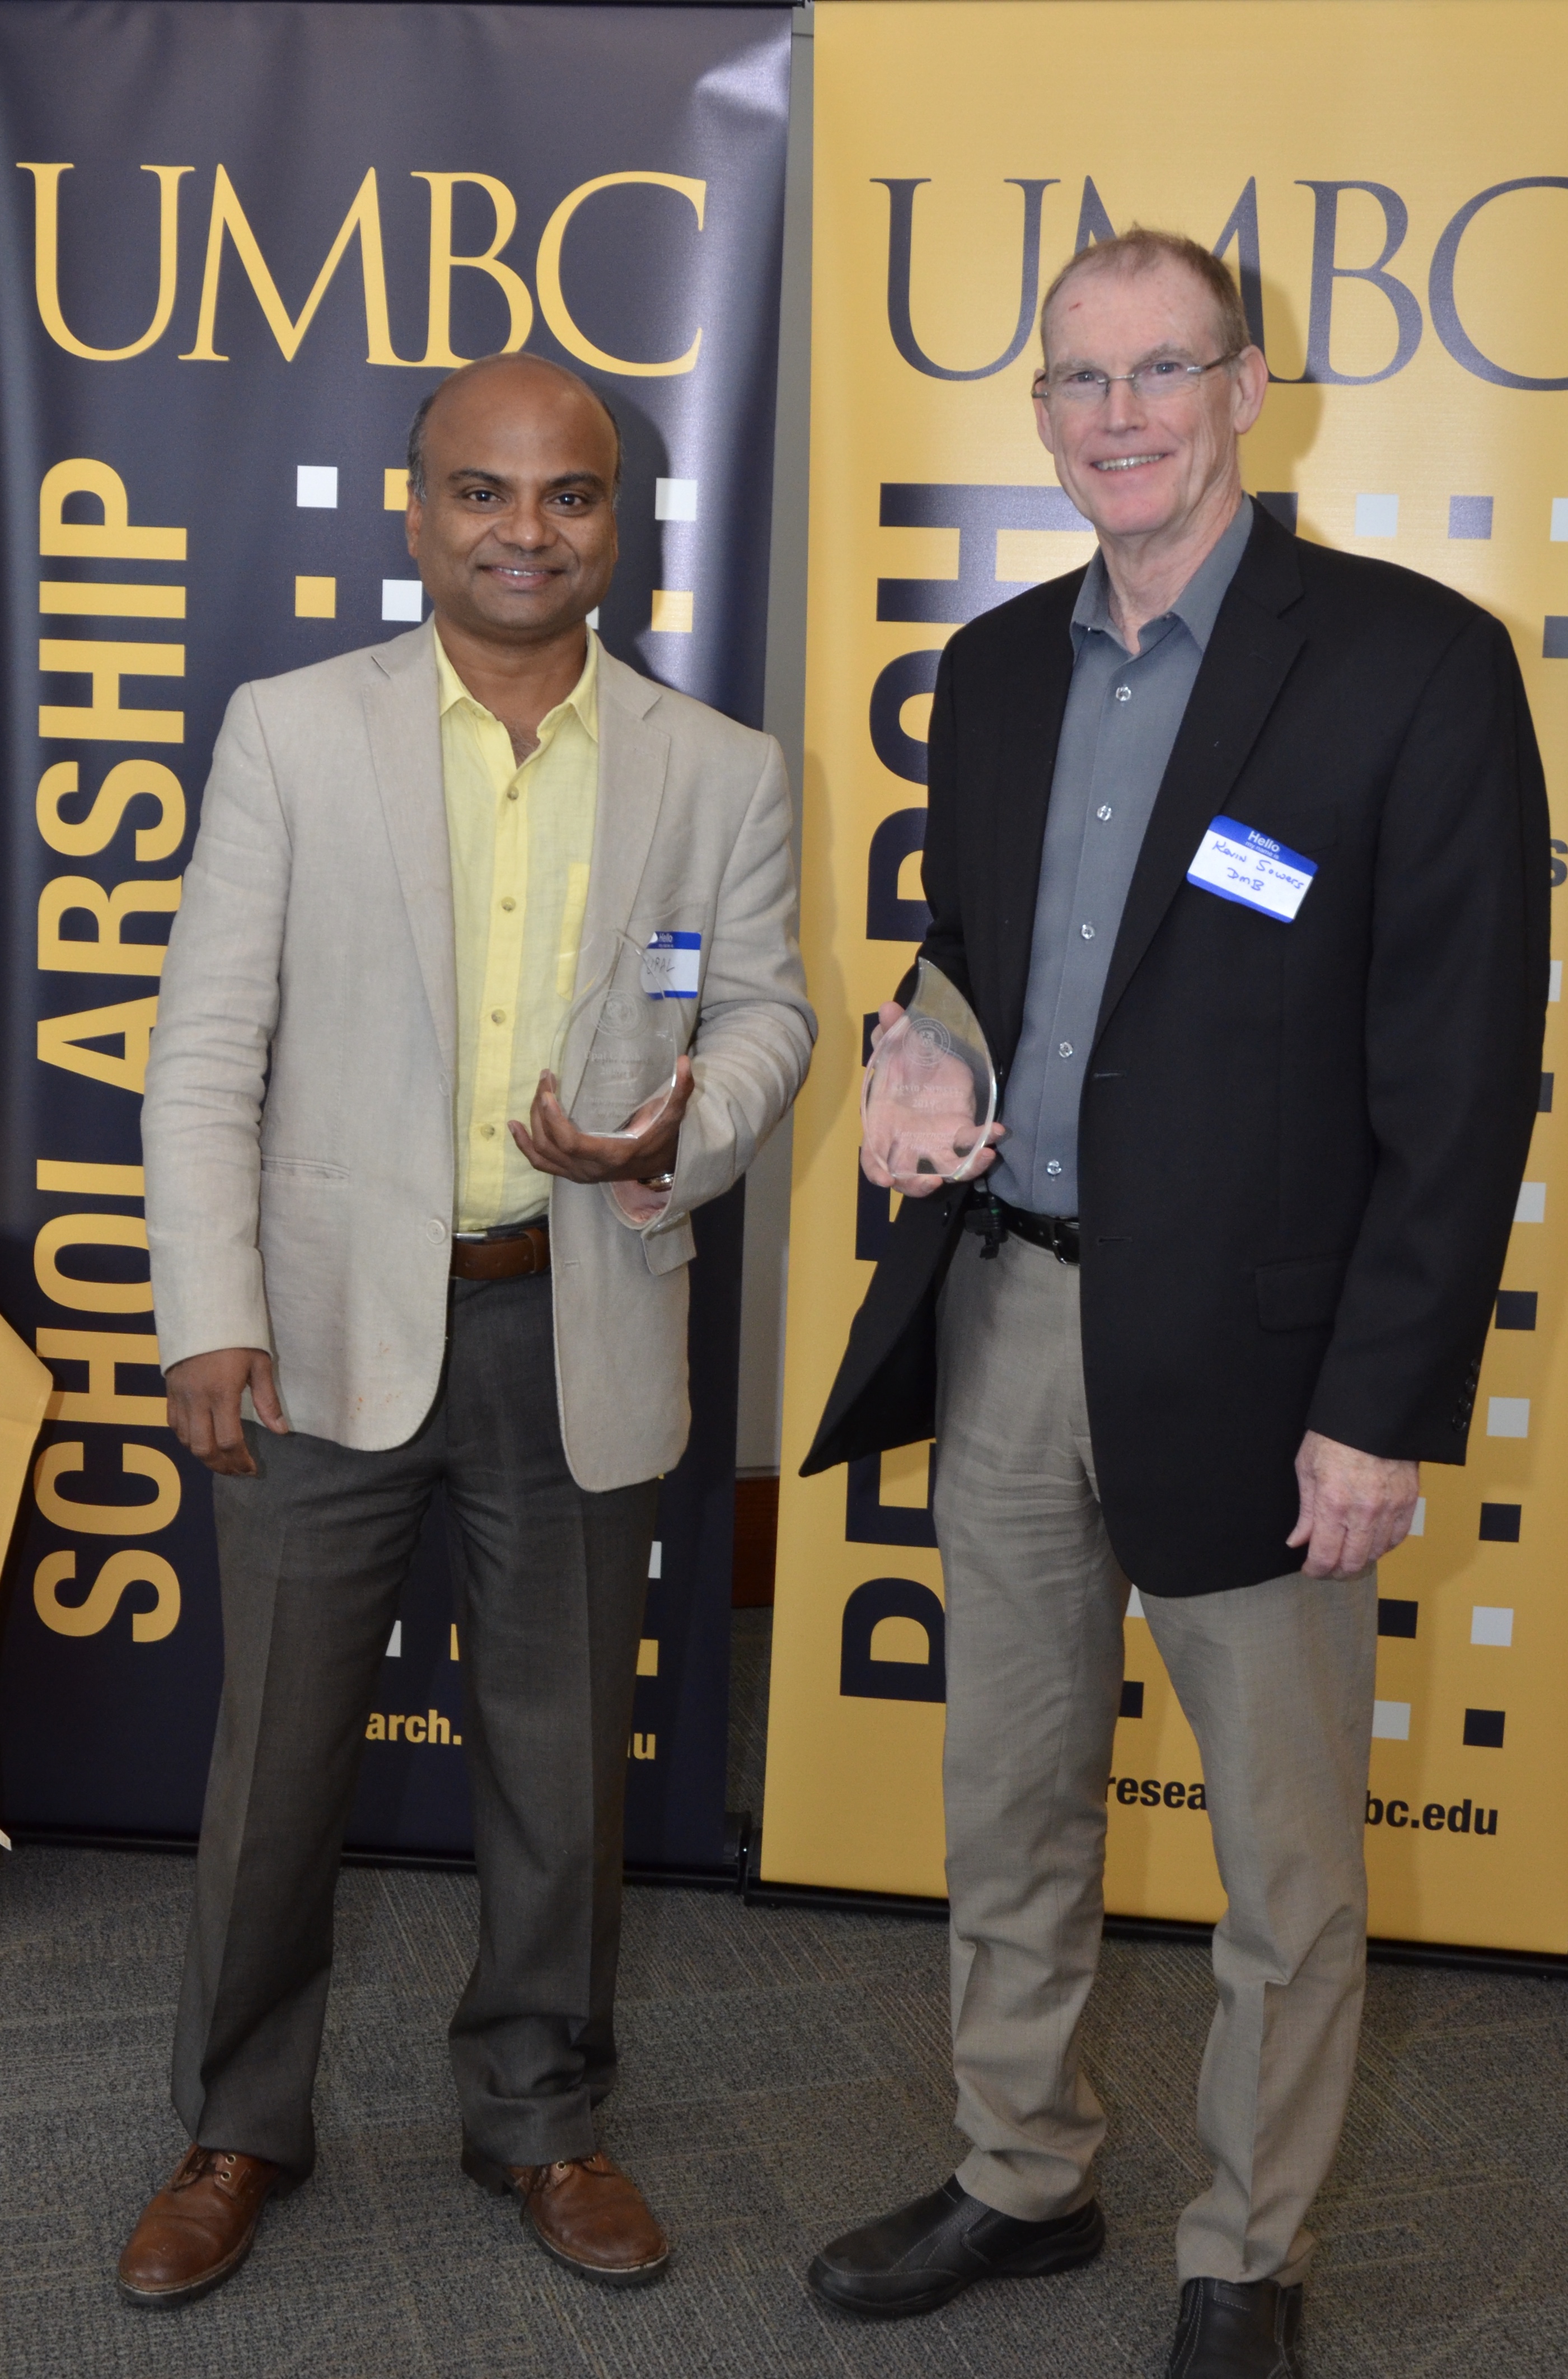 Kevin Sowers and Upal Ghosh hold clear glass trophies